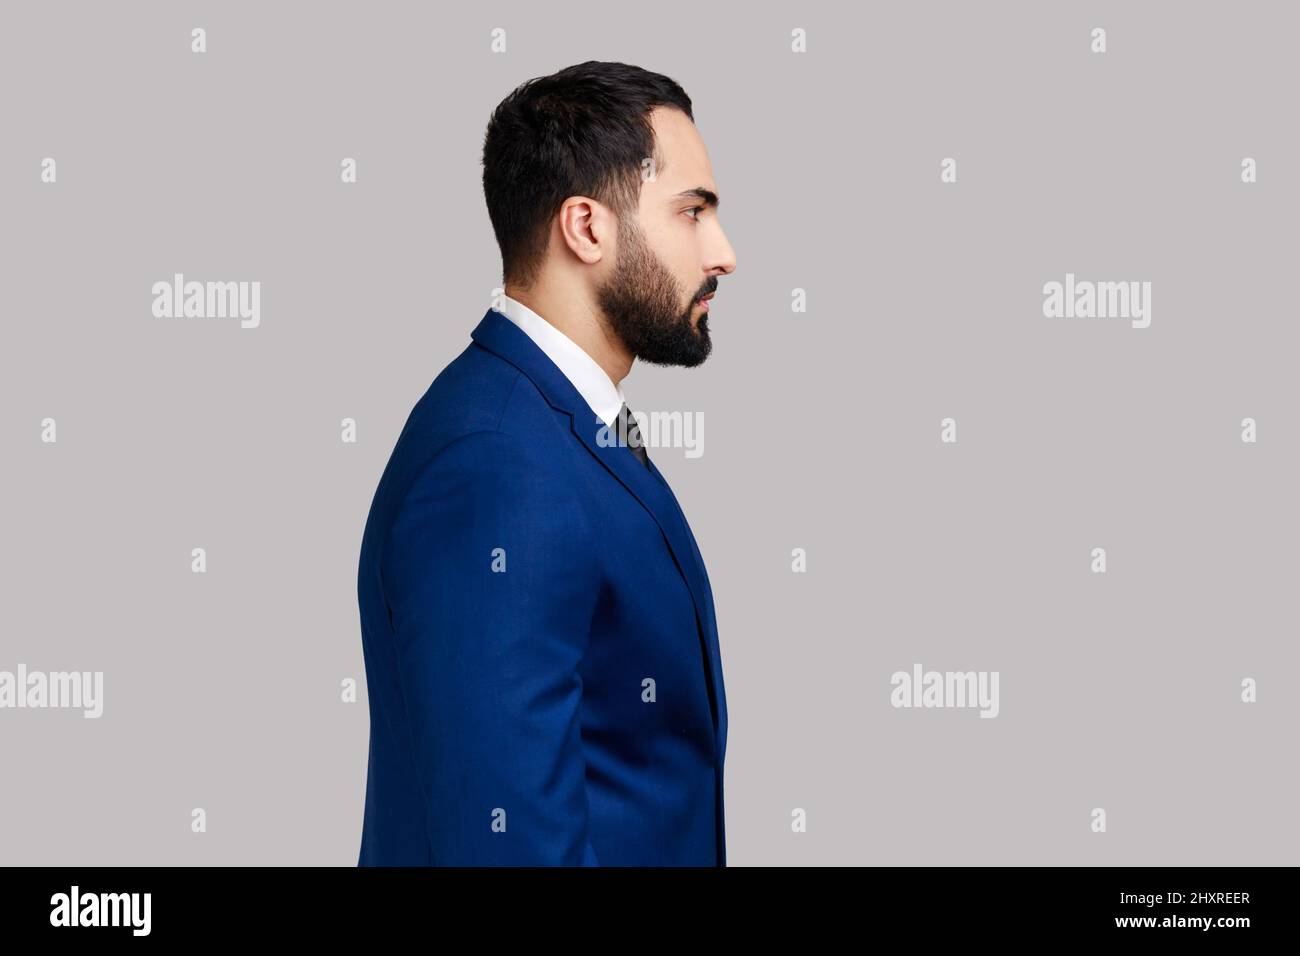 Side view portrait of confident bearded male looking at camera with serious expression, unsmiling determined business man, wearing official style suit. Indoor studio shot isolated on gray background. Stock Photo